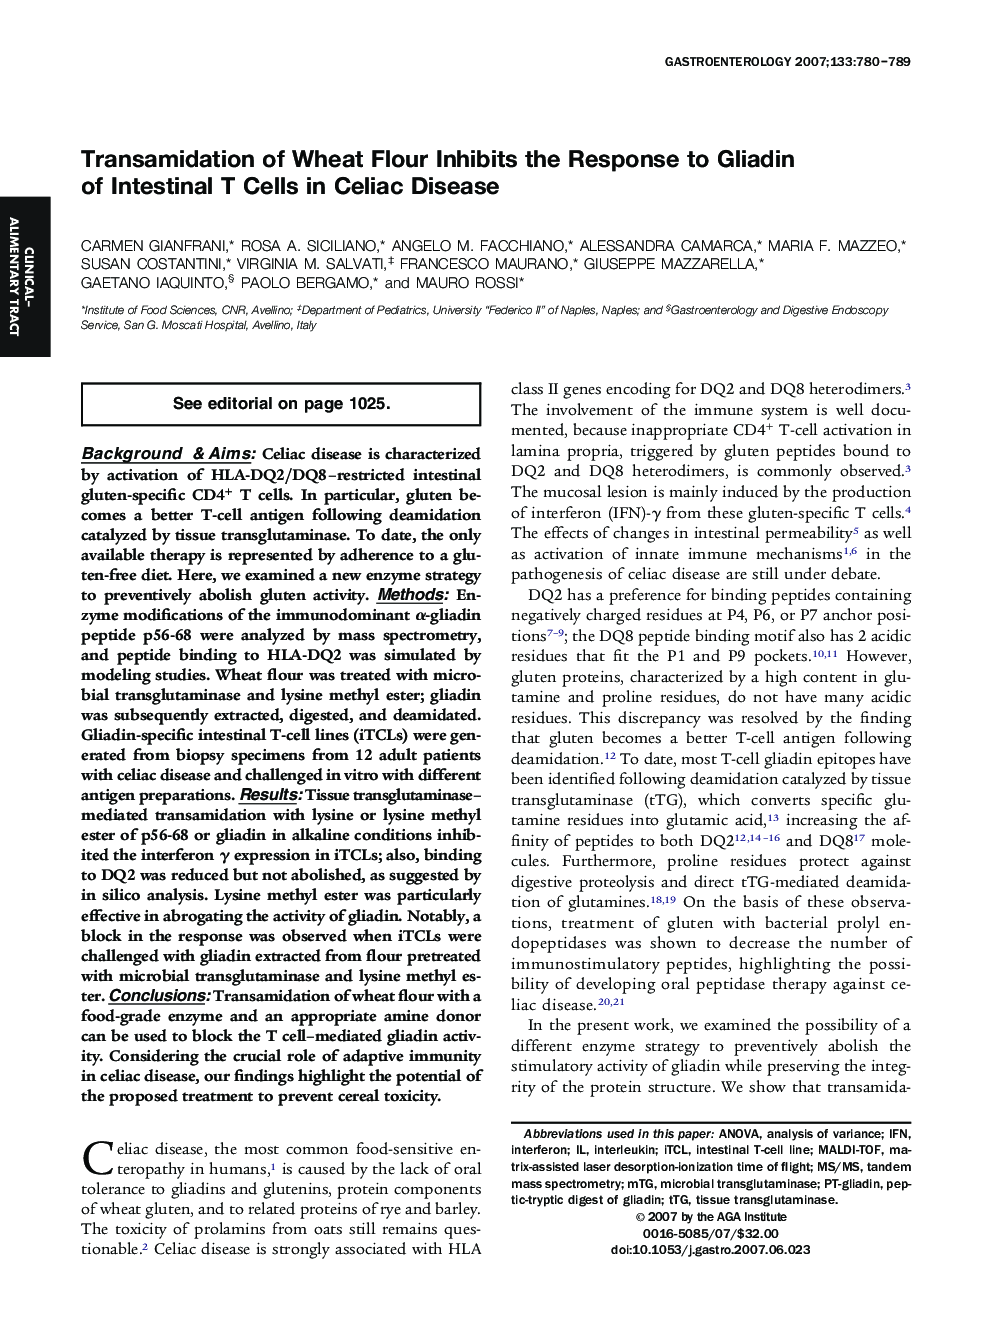 Transamidation of Wheat Flour Inhibits the Response to Gliadin of Intestinal T Cells in Celiac Disease 